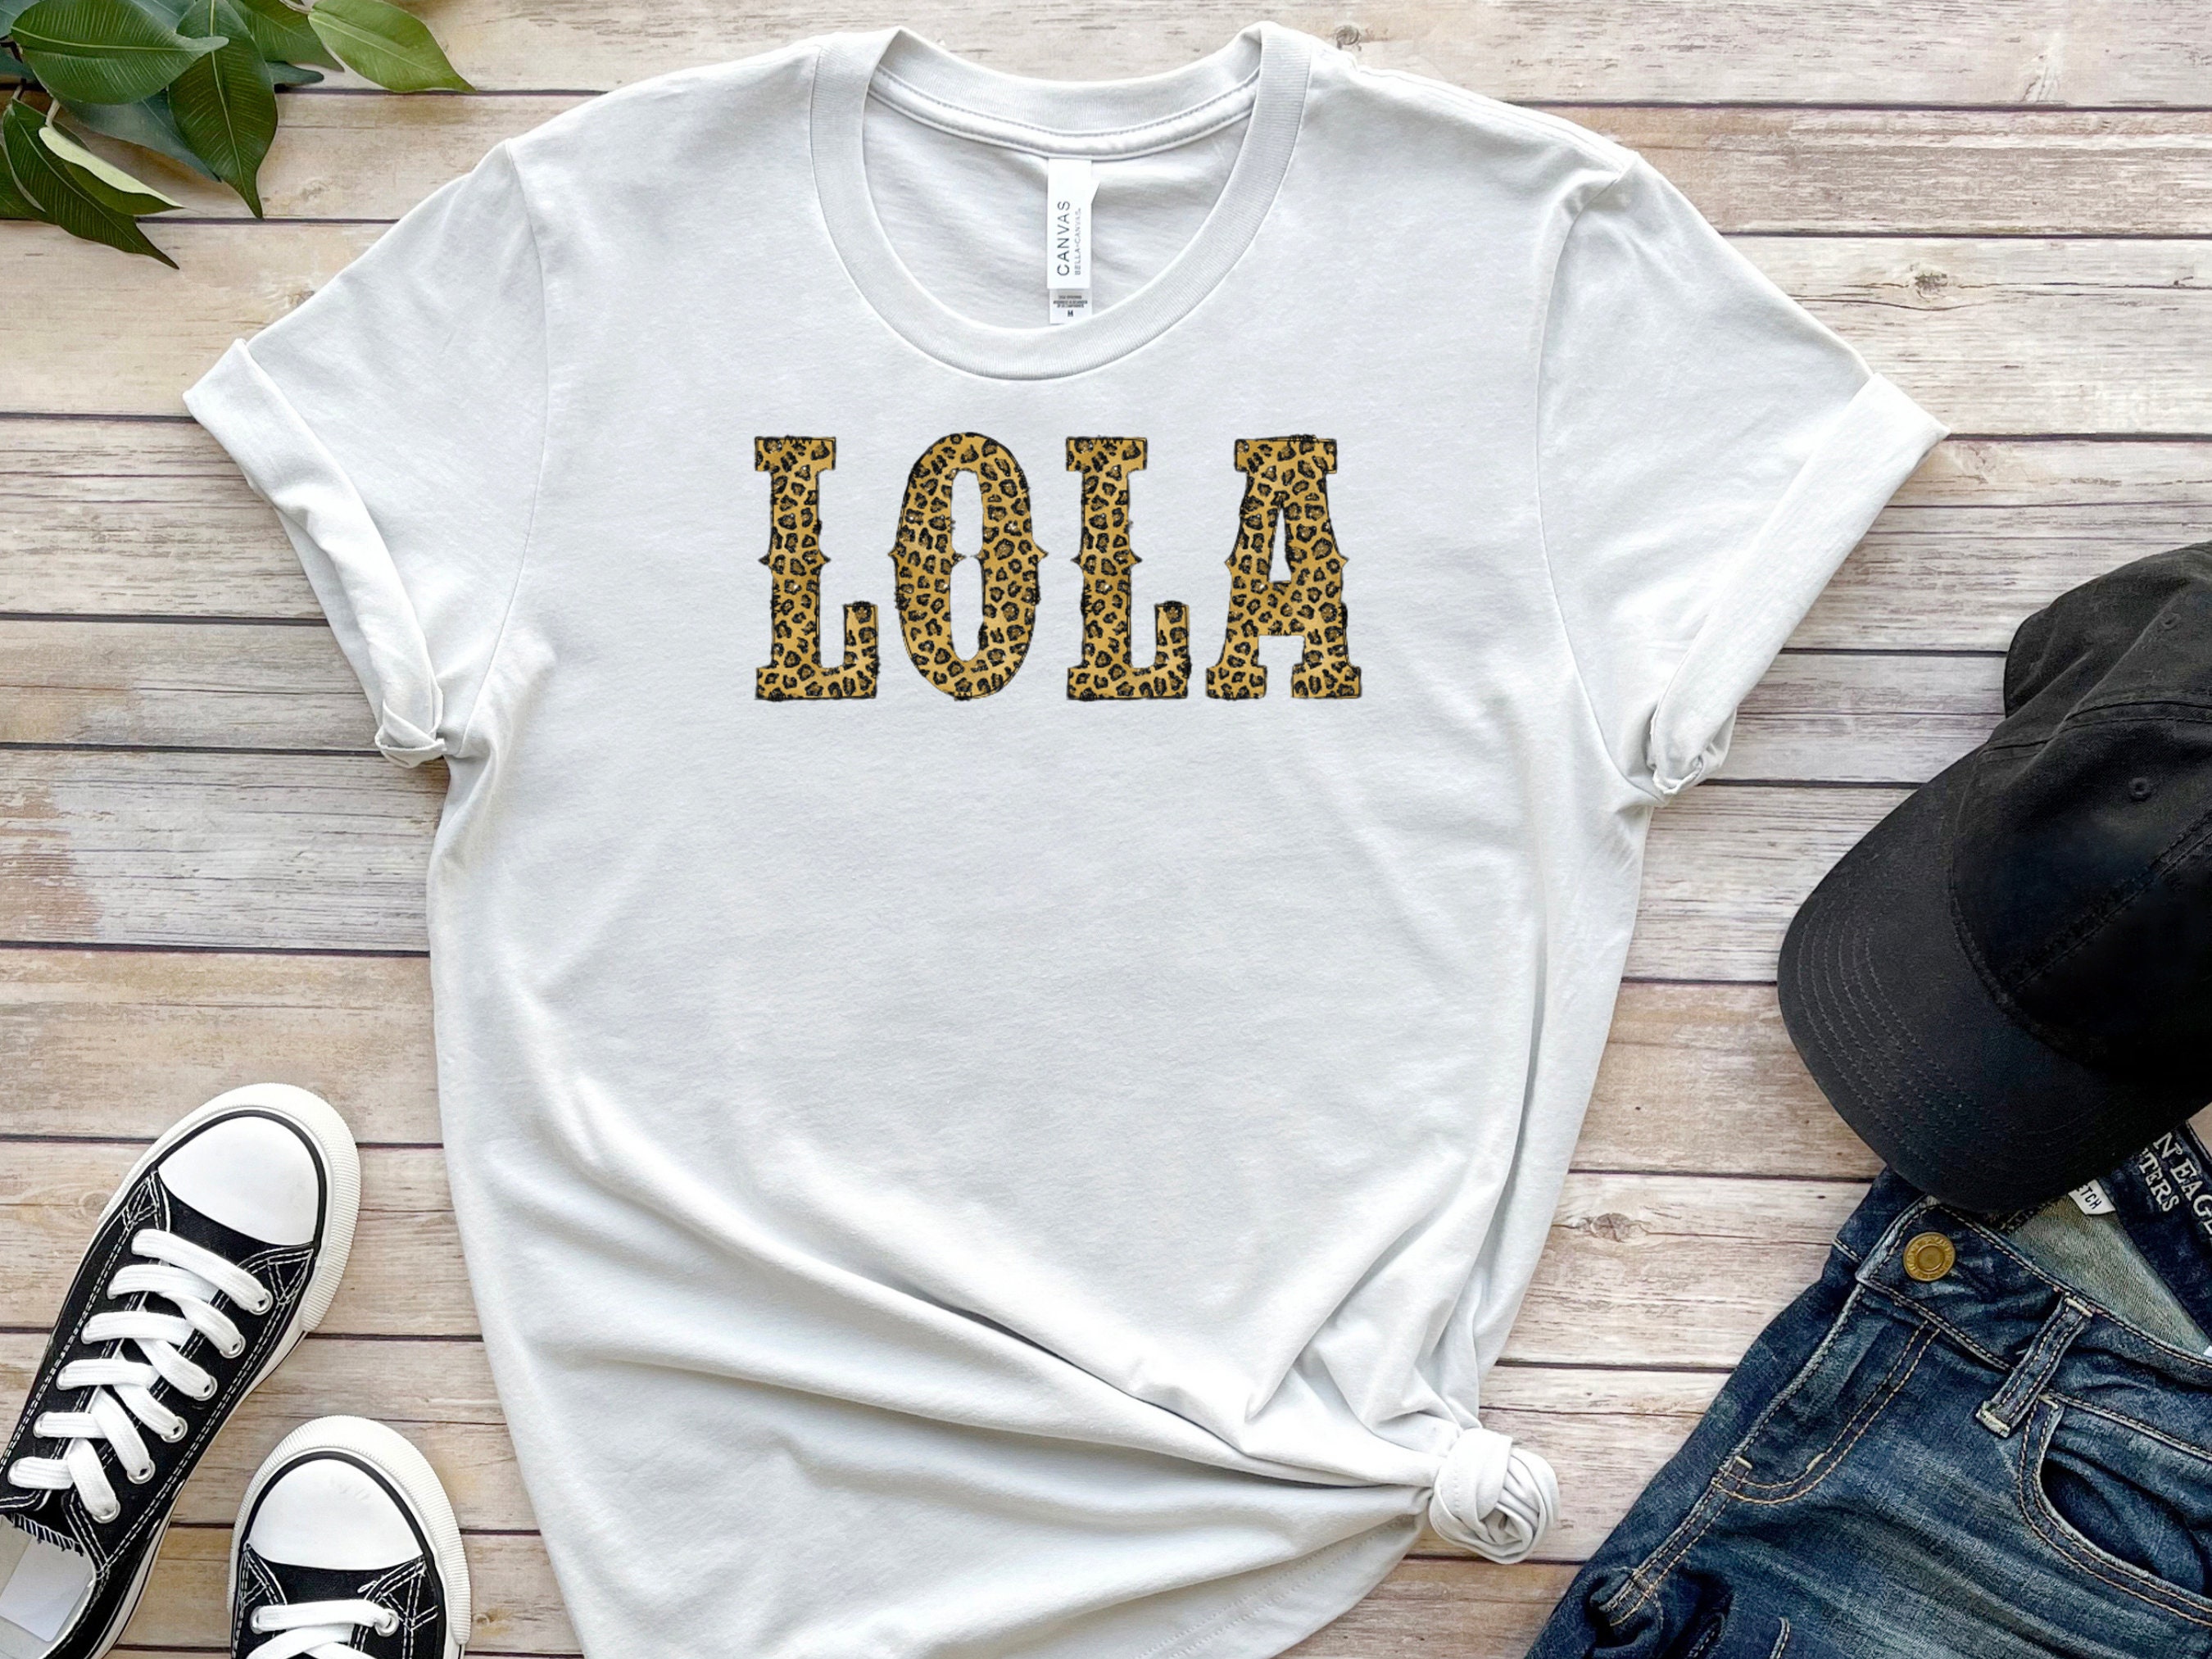 LOLA SUPREMO T-shirt with an exclusive design